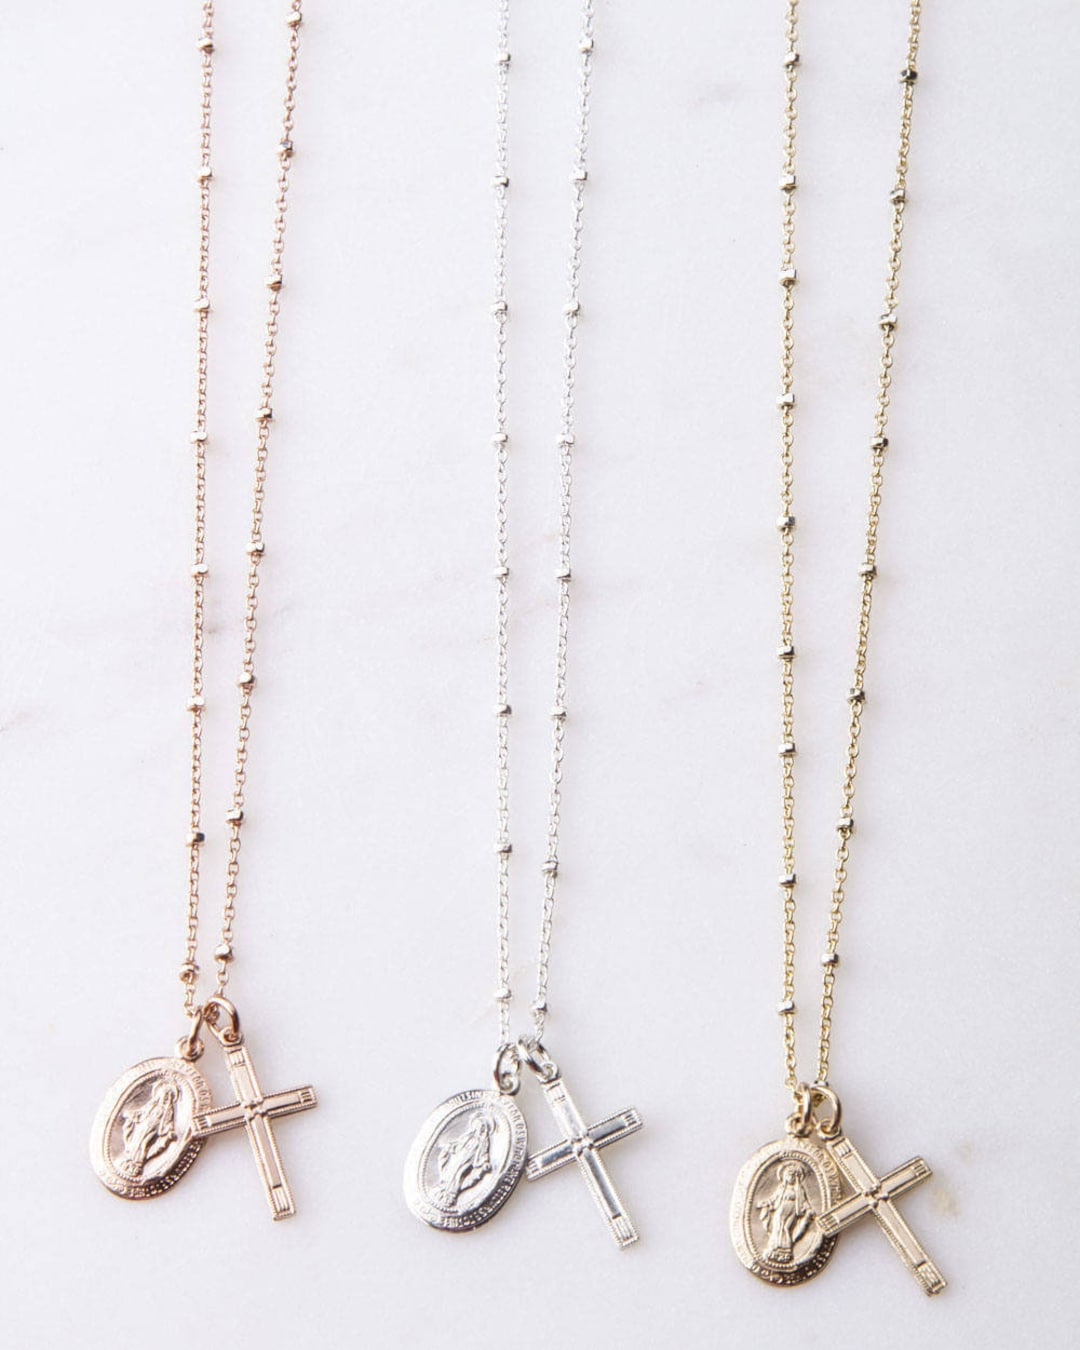 He Who Holds the Key, His Hers, Boyfriend Girlfriend Necklace Set, Couple  Necklace Set, Half Heart, Couples Necklaces, Key to My Heart - Etsy |  Necklace for girlfriend, His and hers necklaces,